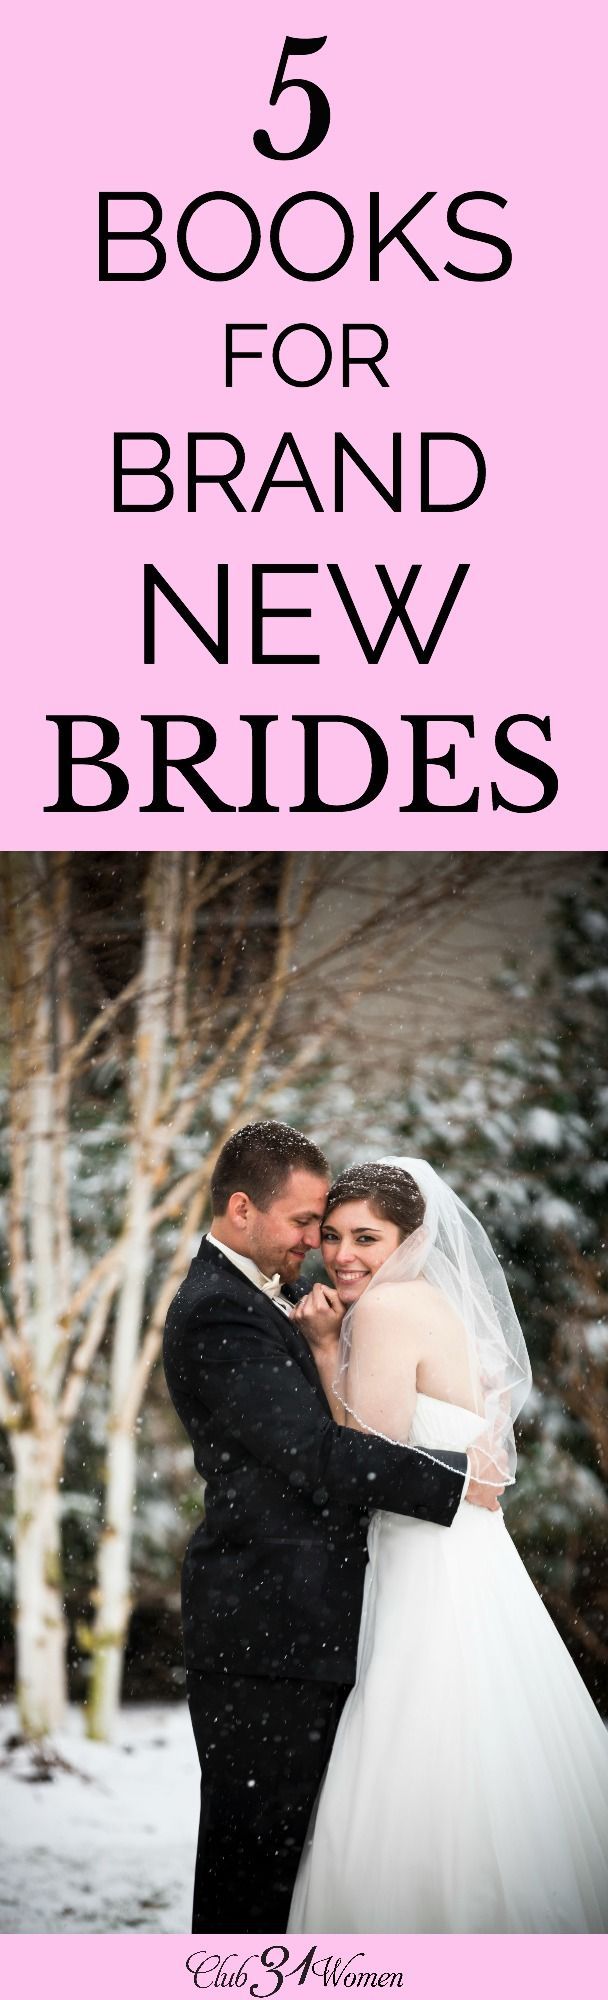 New brides enter marriage with all gusto and joy but sometimes don’t realize how unprepared they are to settle into a new life